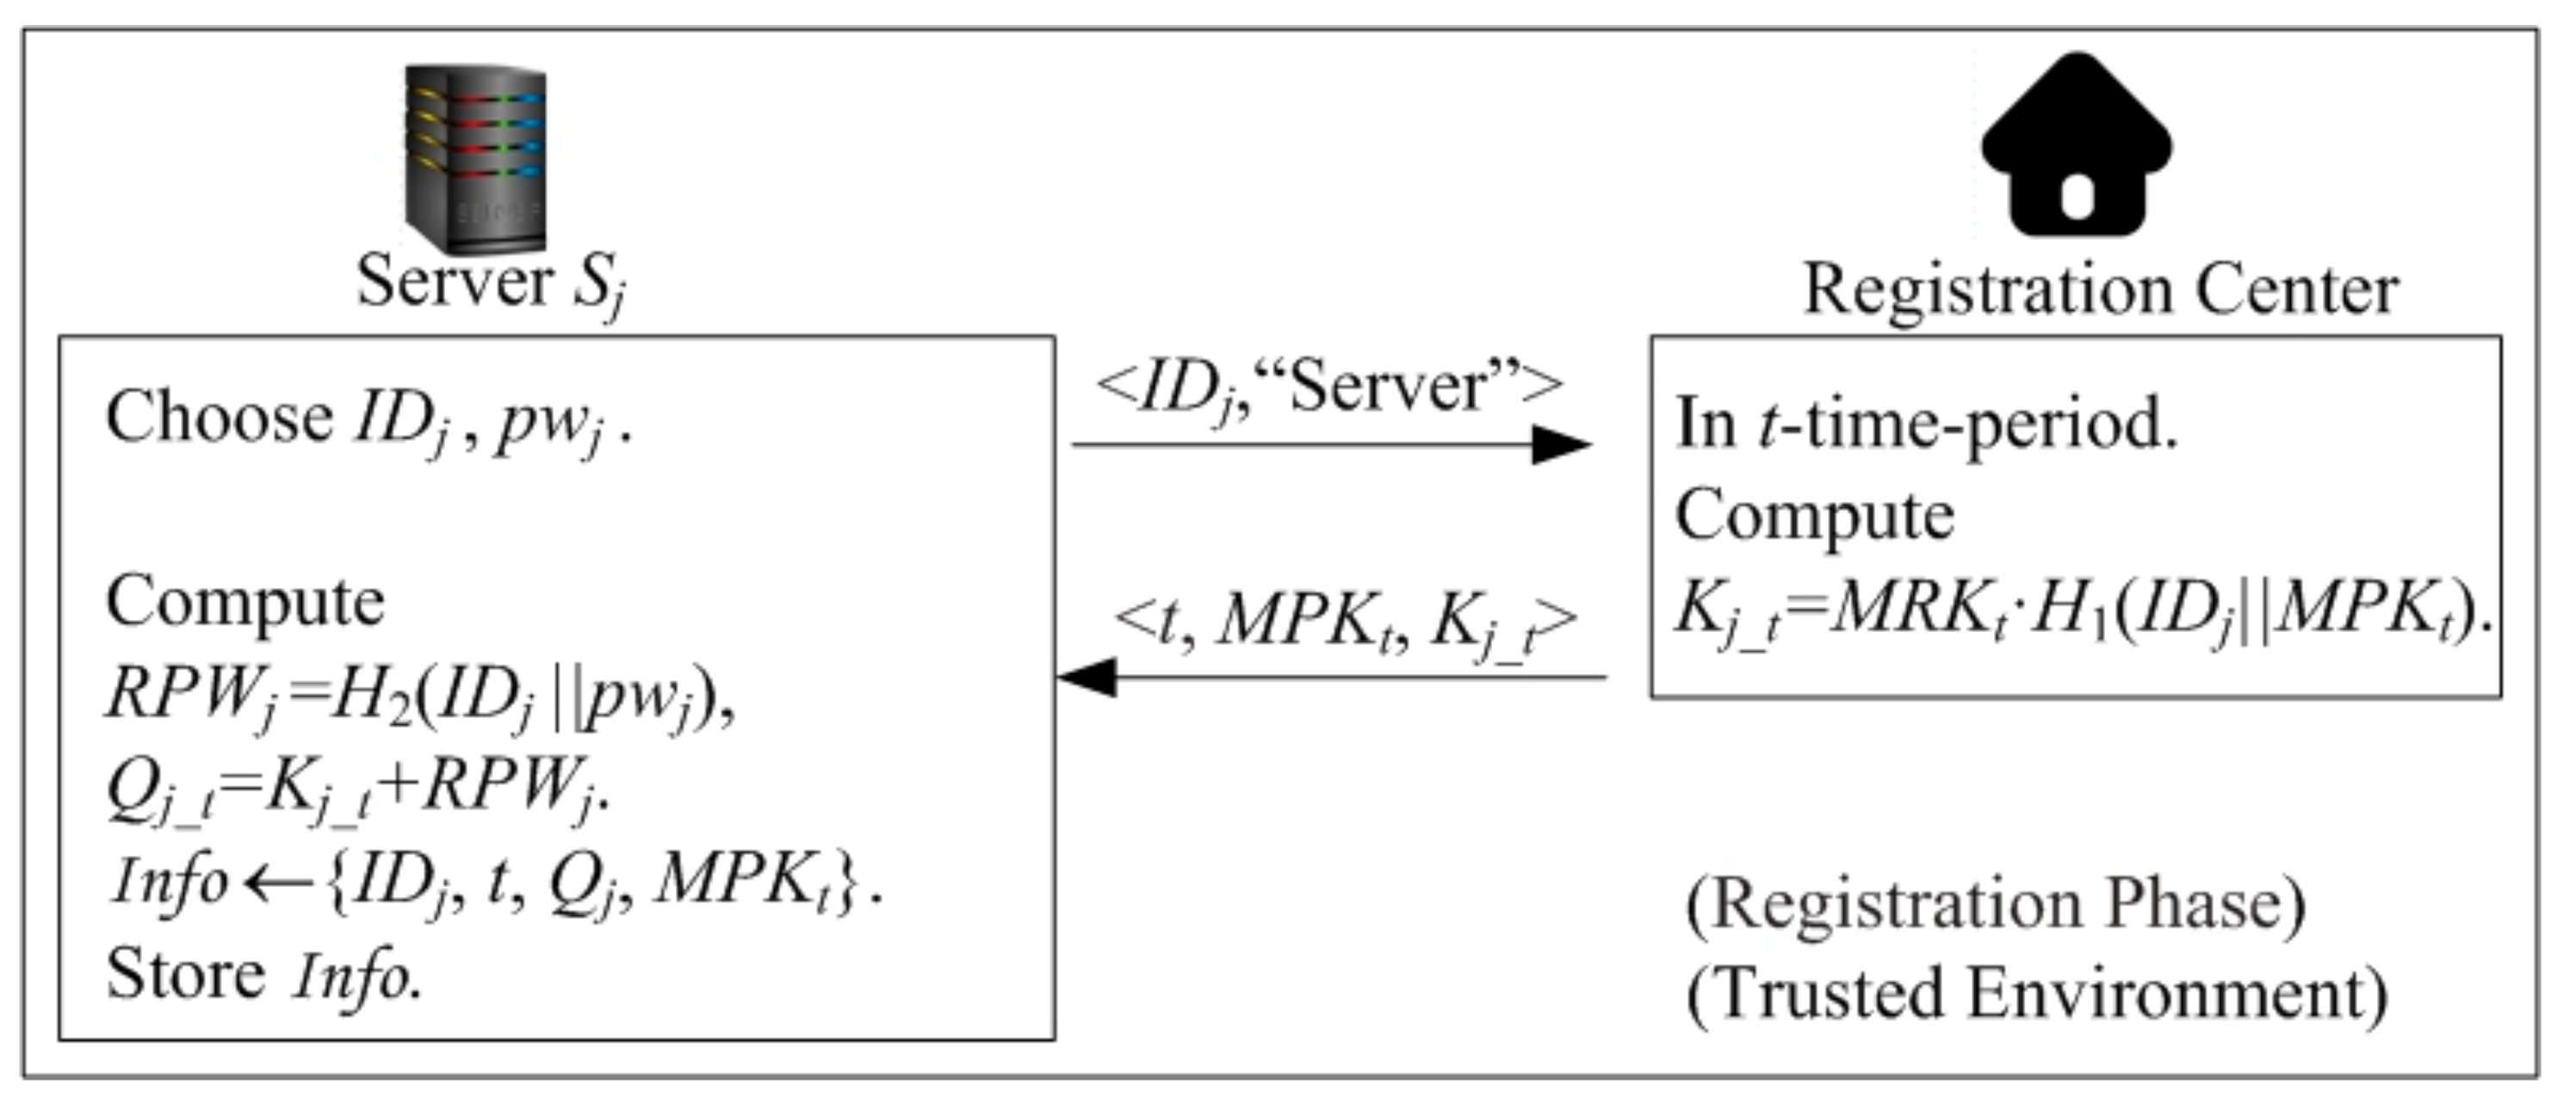 Symmetry Free Full Text Cake Compatible Authentication And Key Exchange Protocol For A Smart City In 5g Networks Html